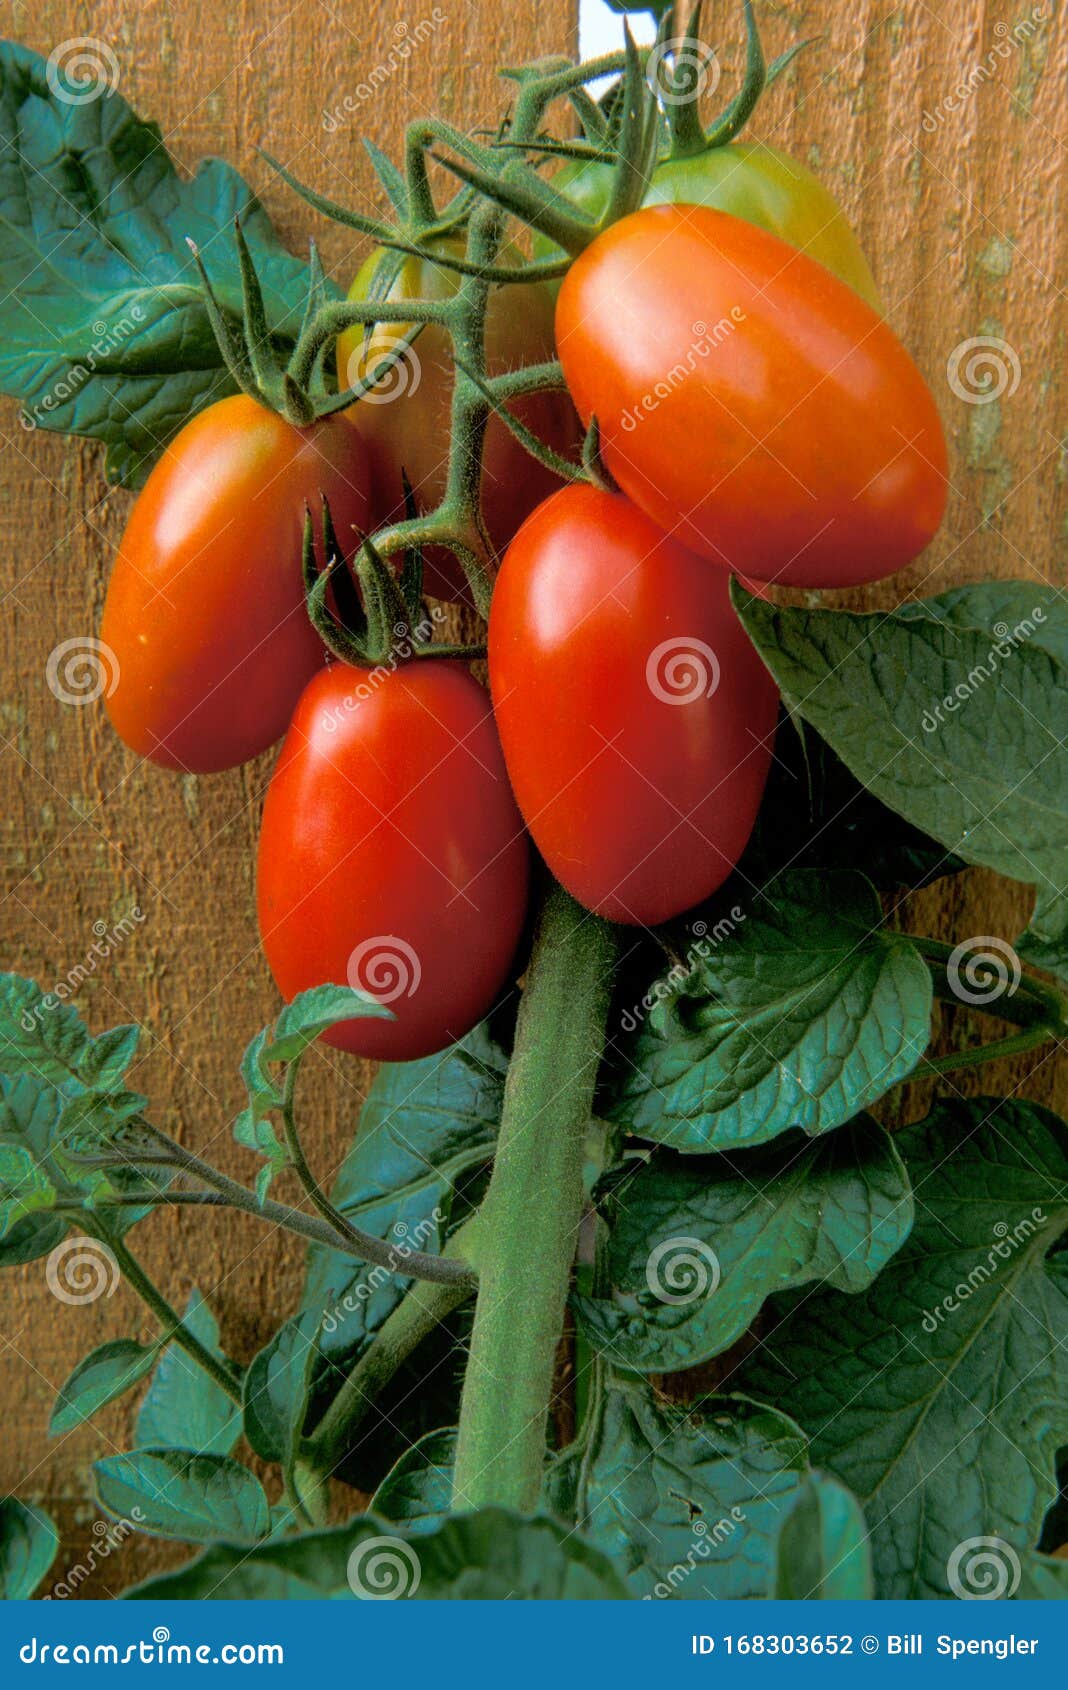 grape tomatoes through a fence